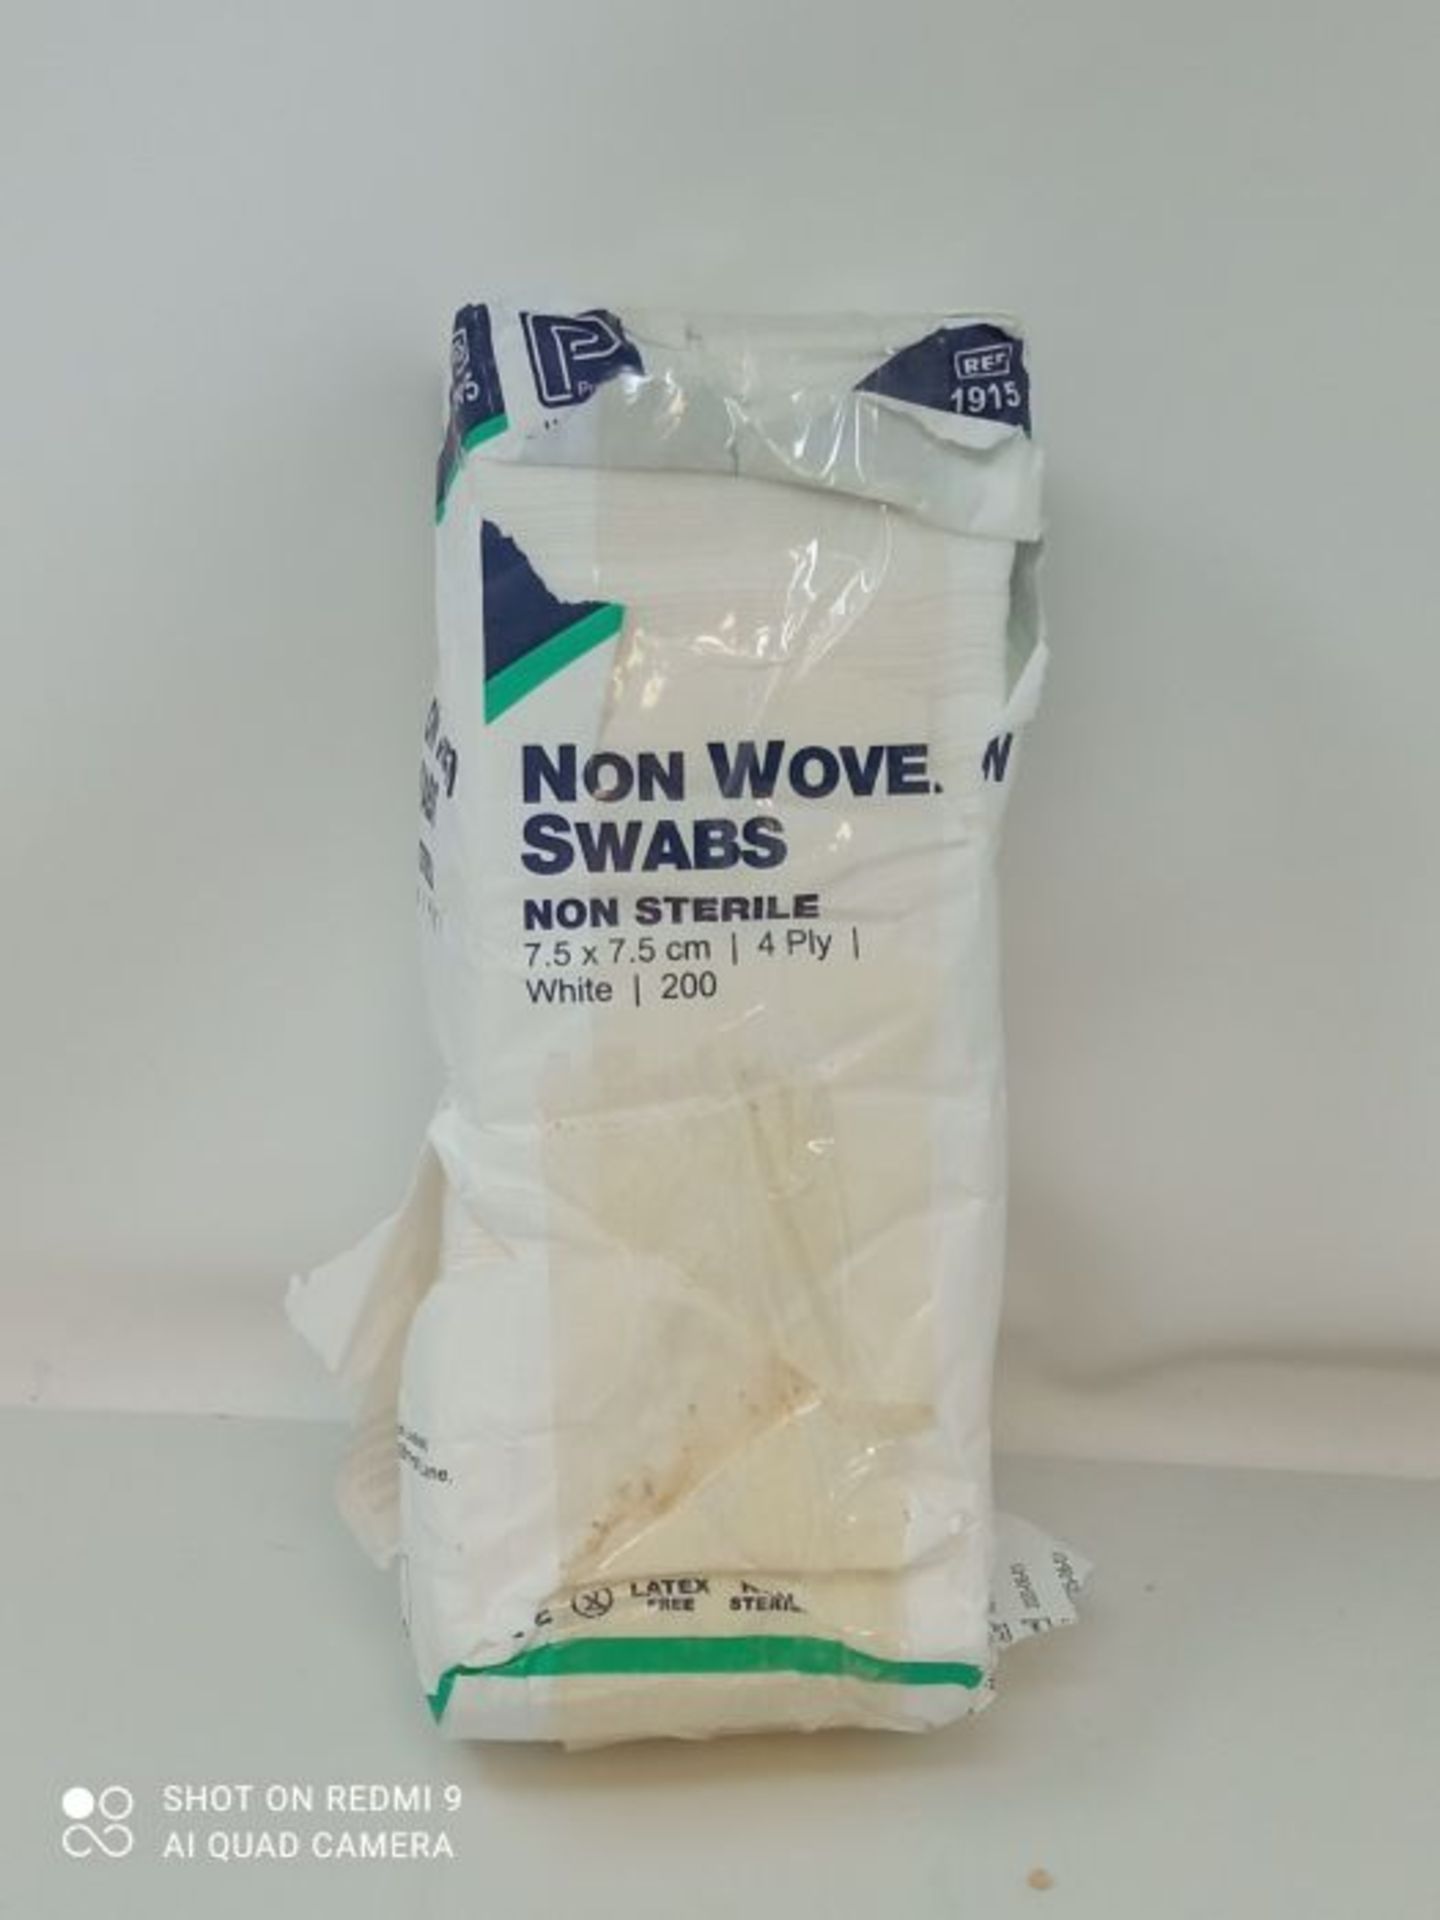 Premier 1915 Non-Sterile Non-Woven Swabs 4 Ply 7.5 cm x 7.5 cm White Paper Packs (Pack - Image 3 of 3